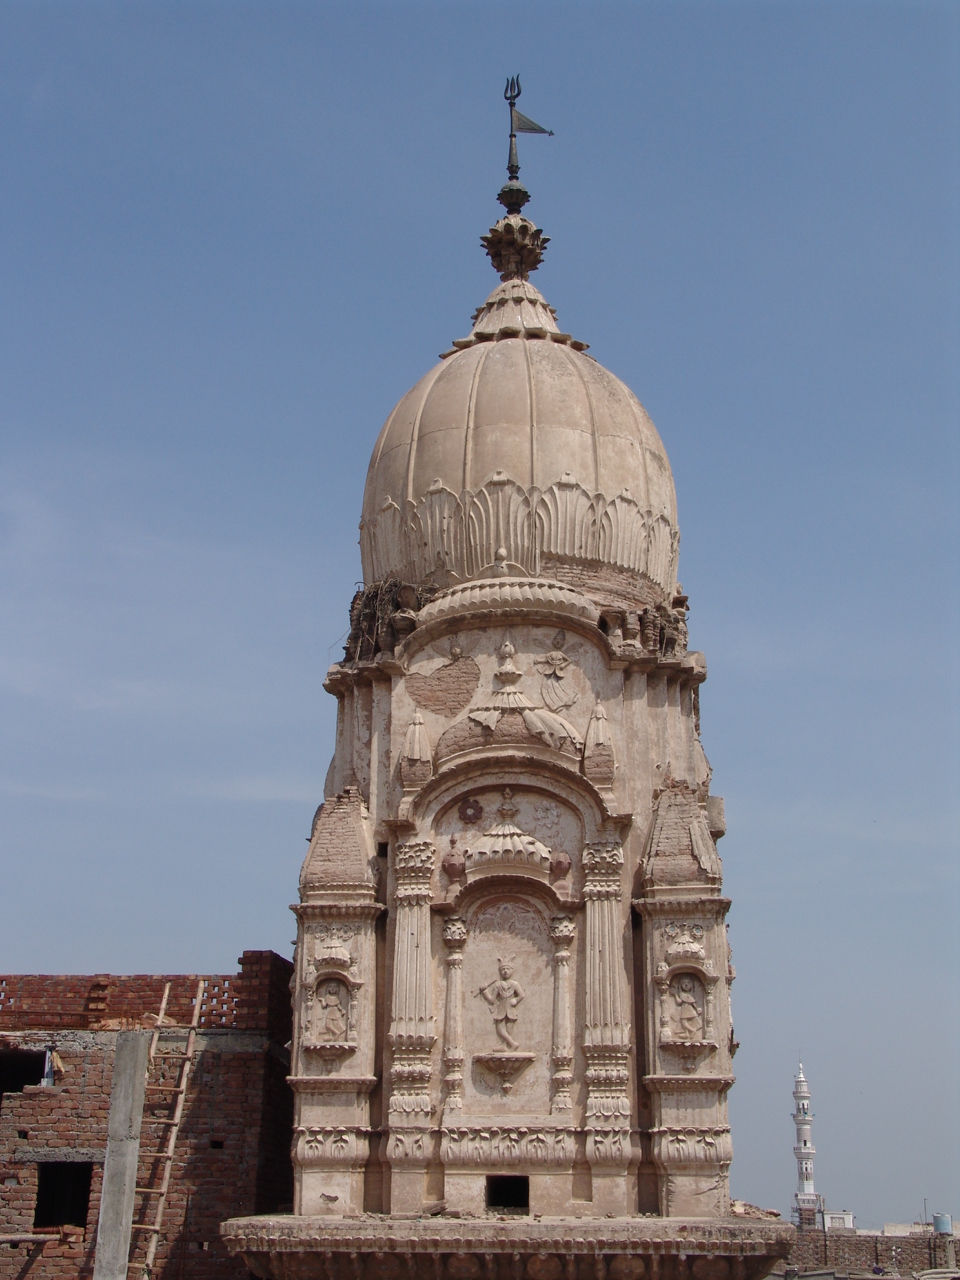 Bavalakh Nath Temple in Jhang Image: Shuaibonly / Wikimedia